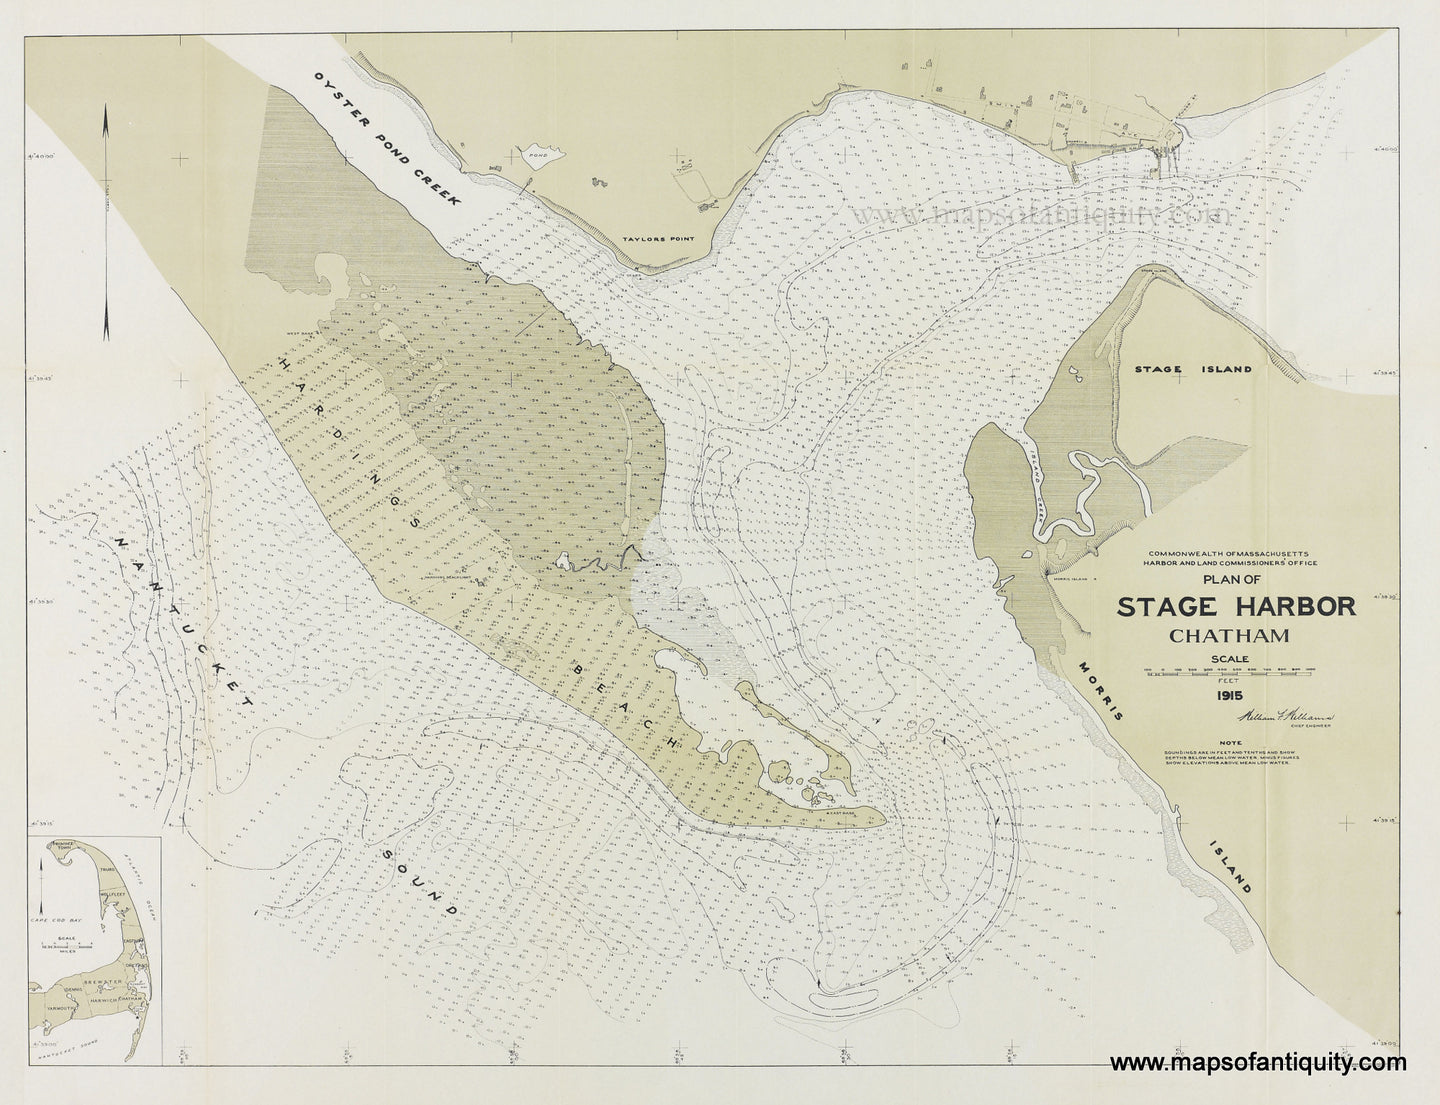 Reproduction of an antique chart of part of the coast of Chatham MA in a khaki color for the land, with water depths aka soundings throughout and marshy areas grayed out. This would have been useful for sailing in these areas but may also have been used for dredging